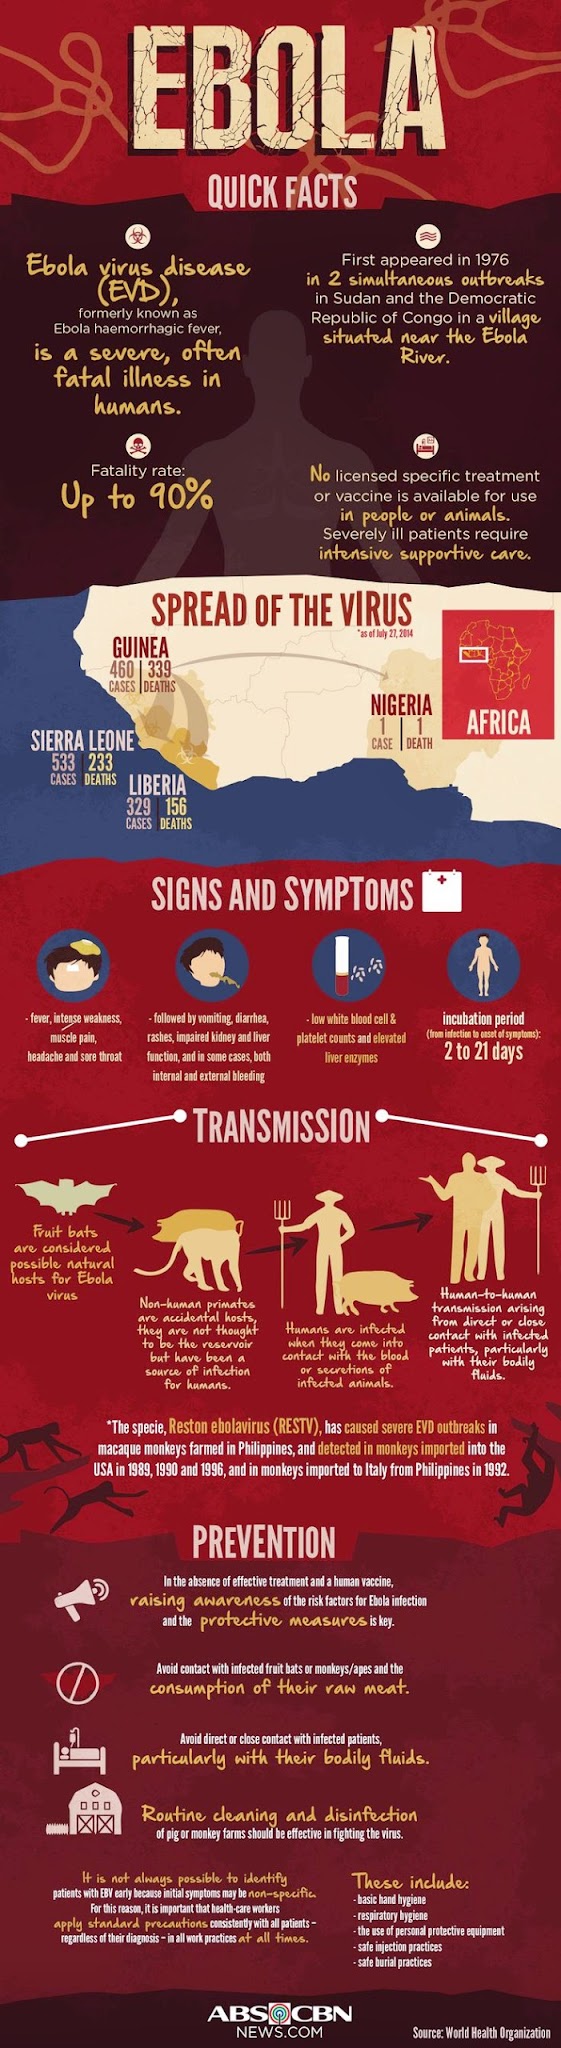 Ebola Infographic by Angela Salano for ABS-CBNnews.com